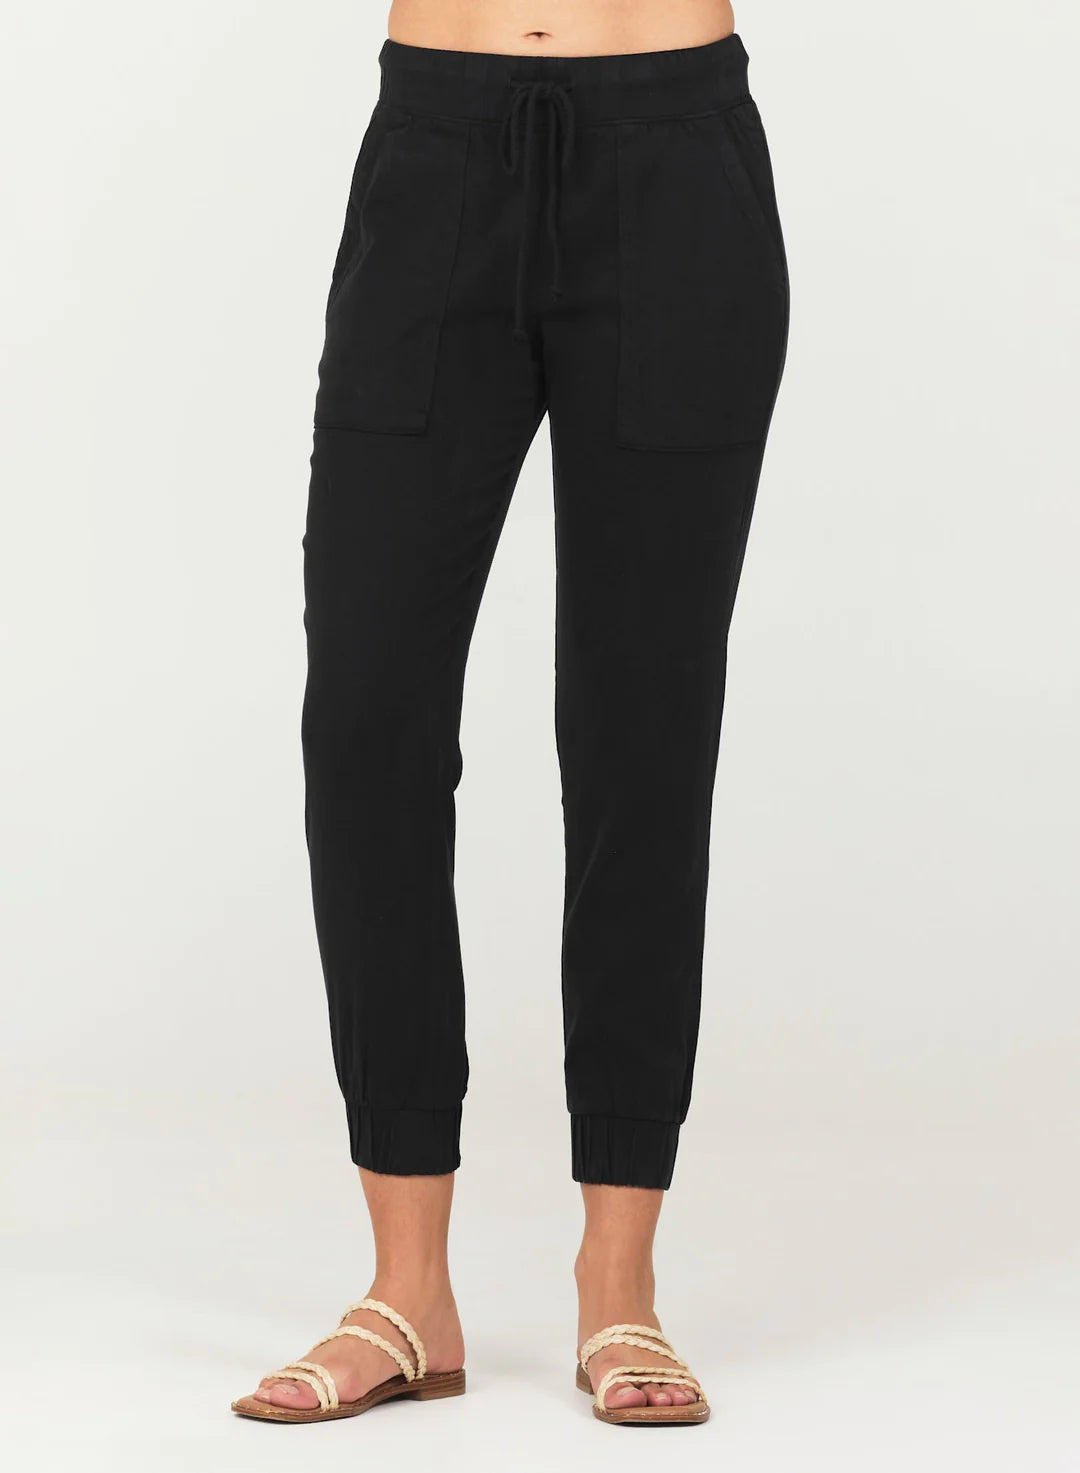 Black jogger trousers with four pockets and elasticated cuffs